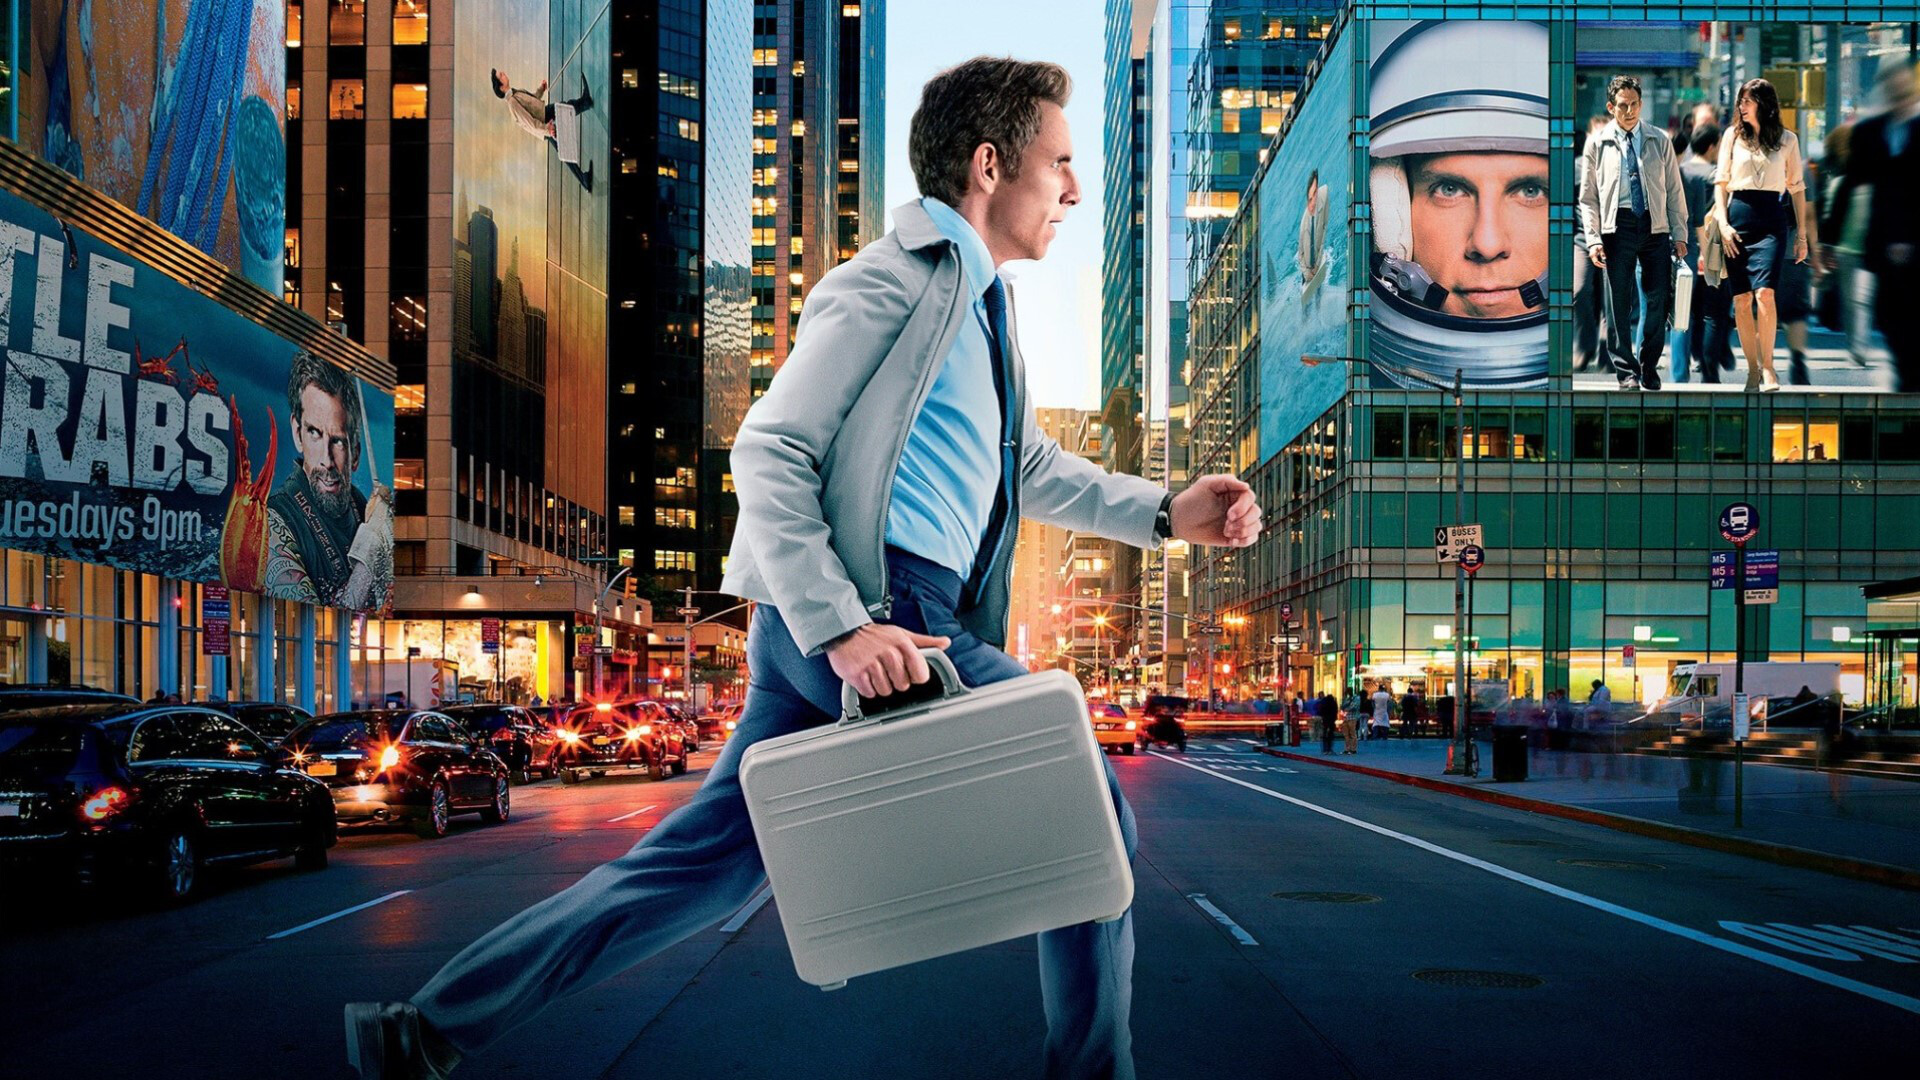 The Secret Life of Walter Mitty: Theatrical release poster, Comedy by Ben Stiller. 1920x1080 Full HD Wallpaper.